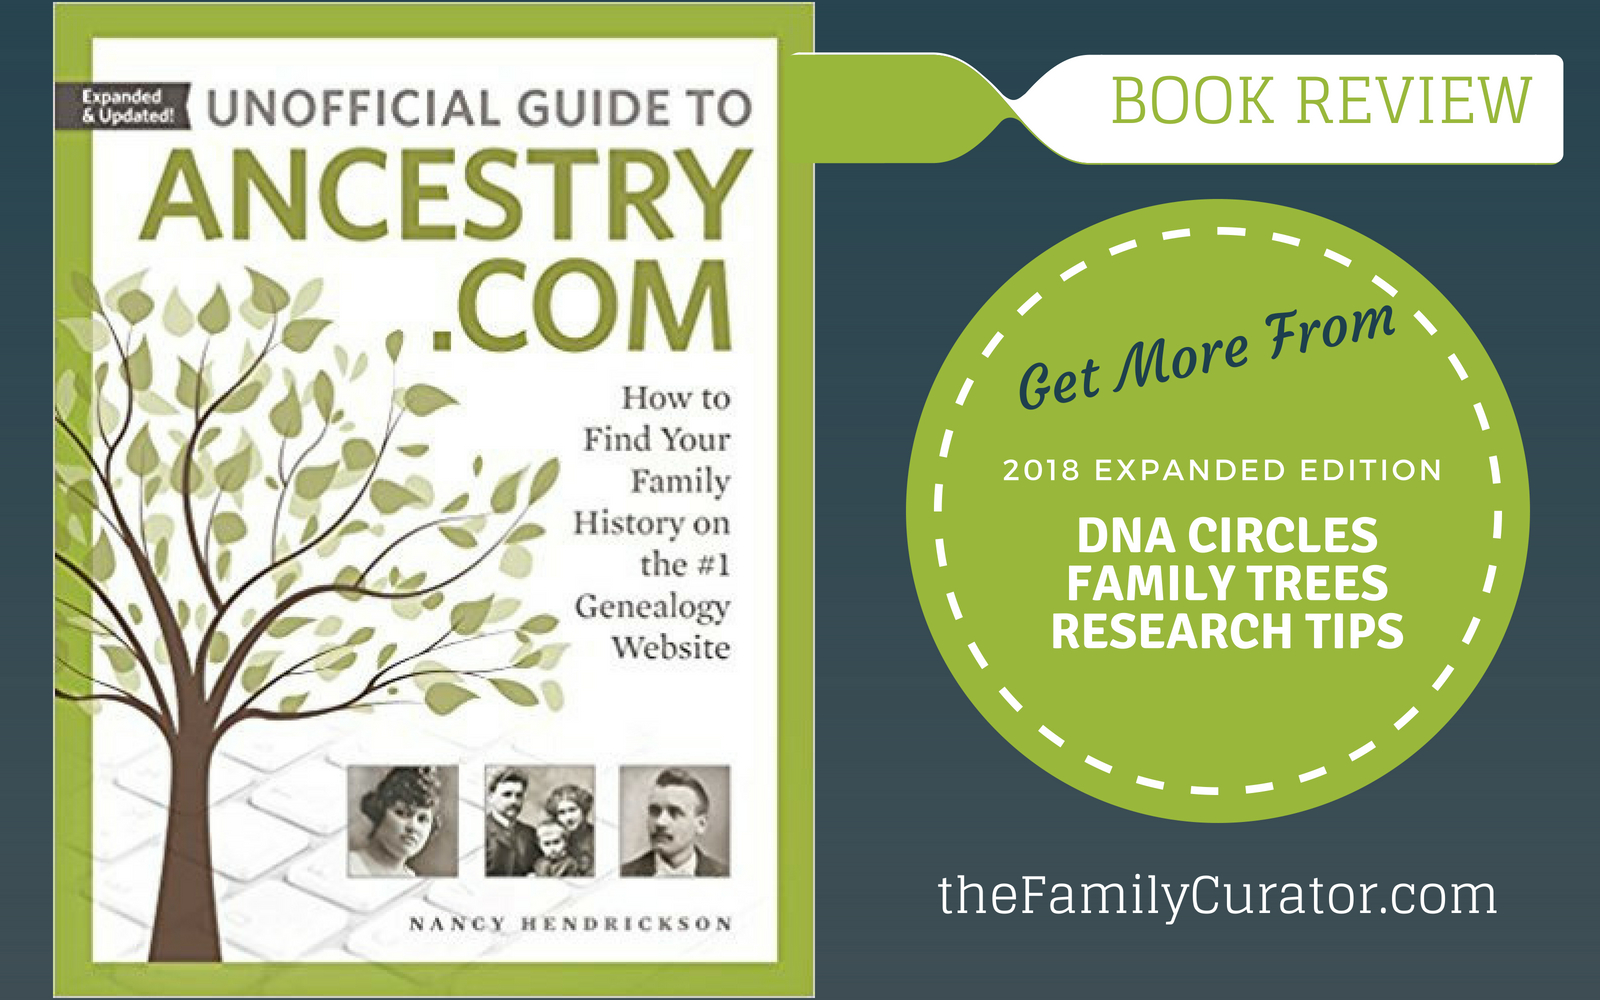 Book Review of Unofficial Guide to Ancestry.com